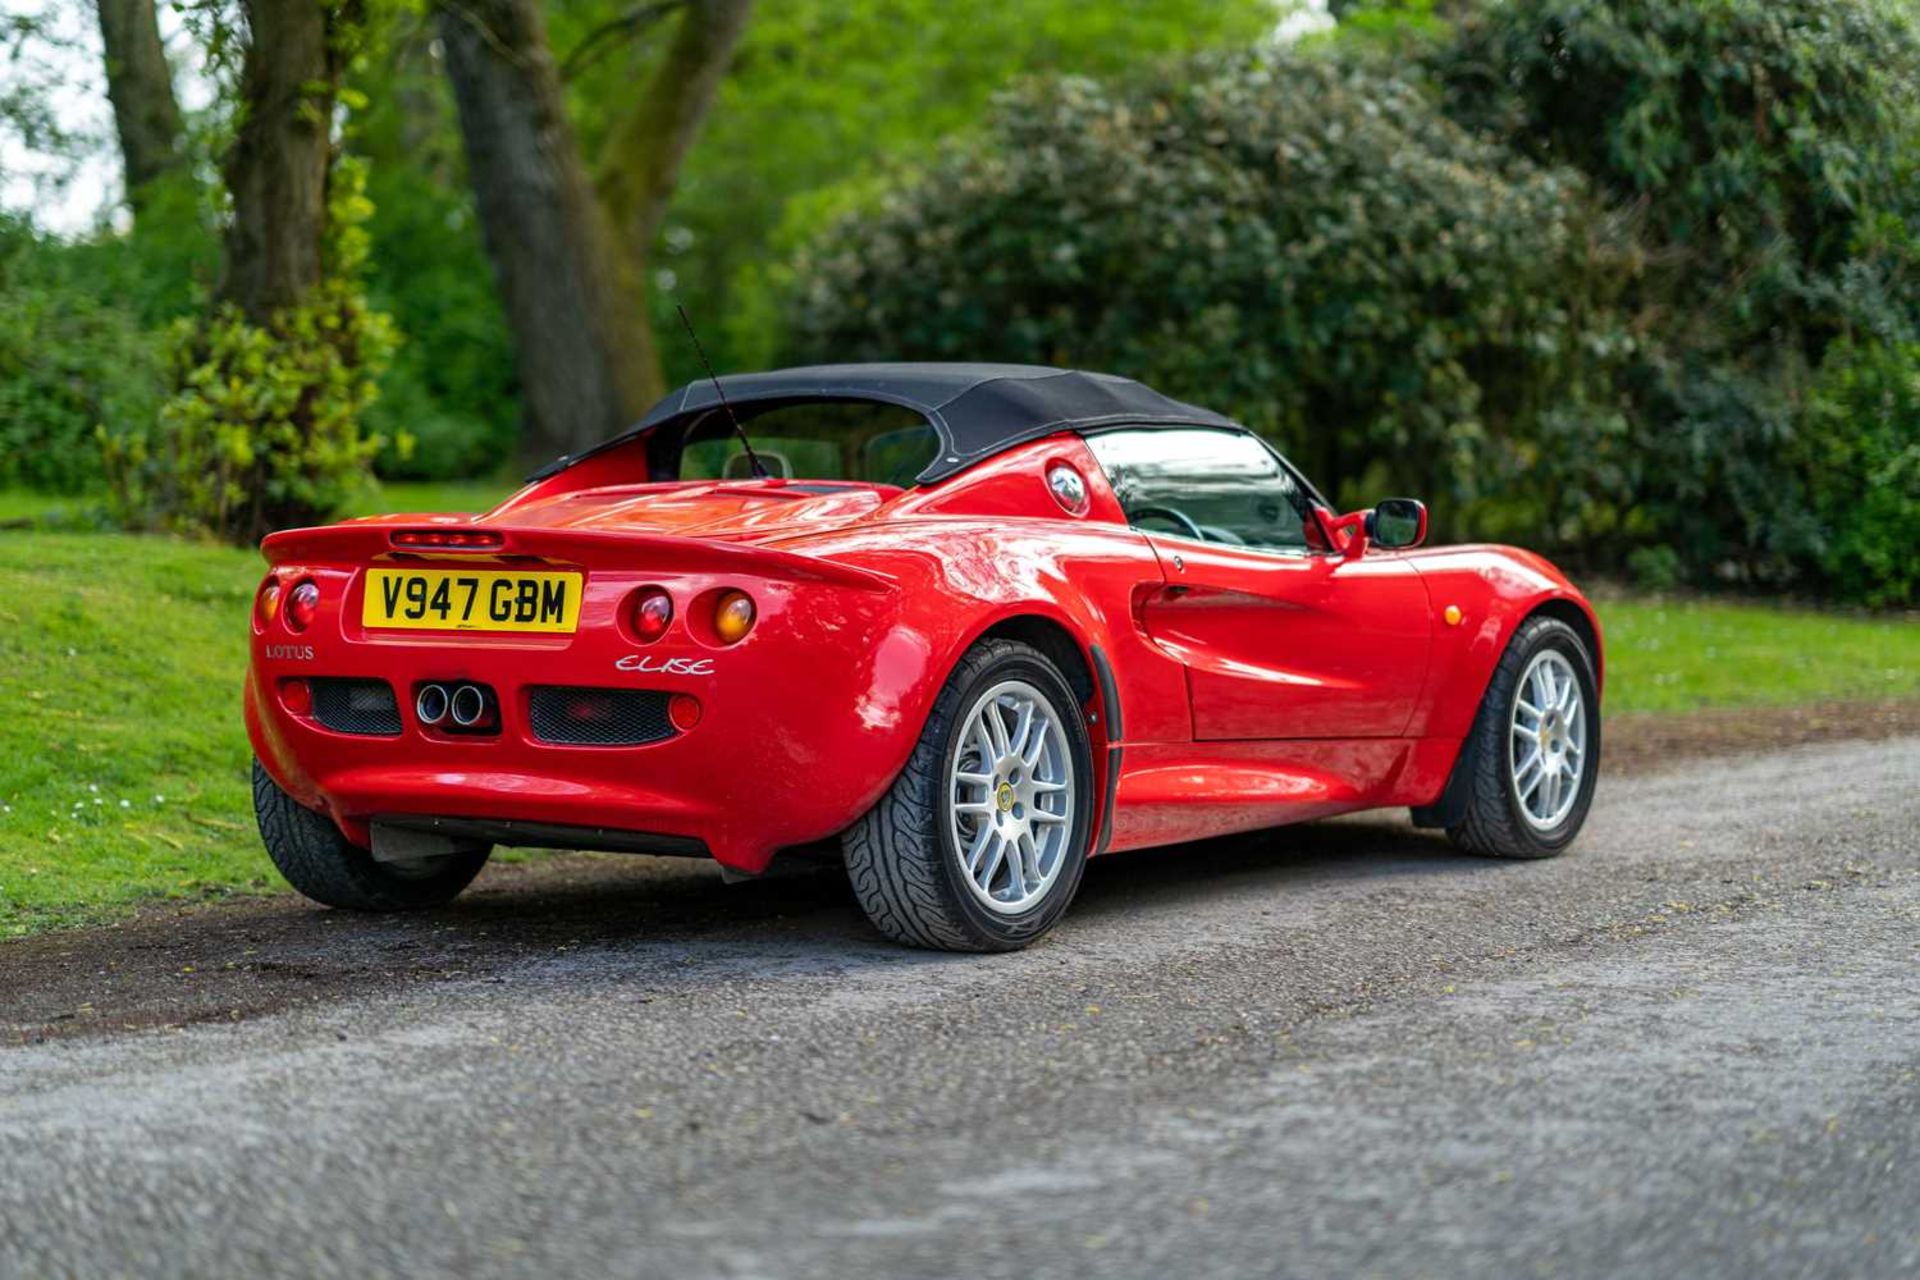 1999 Lotus Elise S1 Only 39,000 miles from new - Image 8 of 57